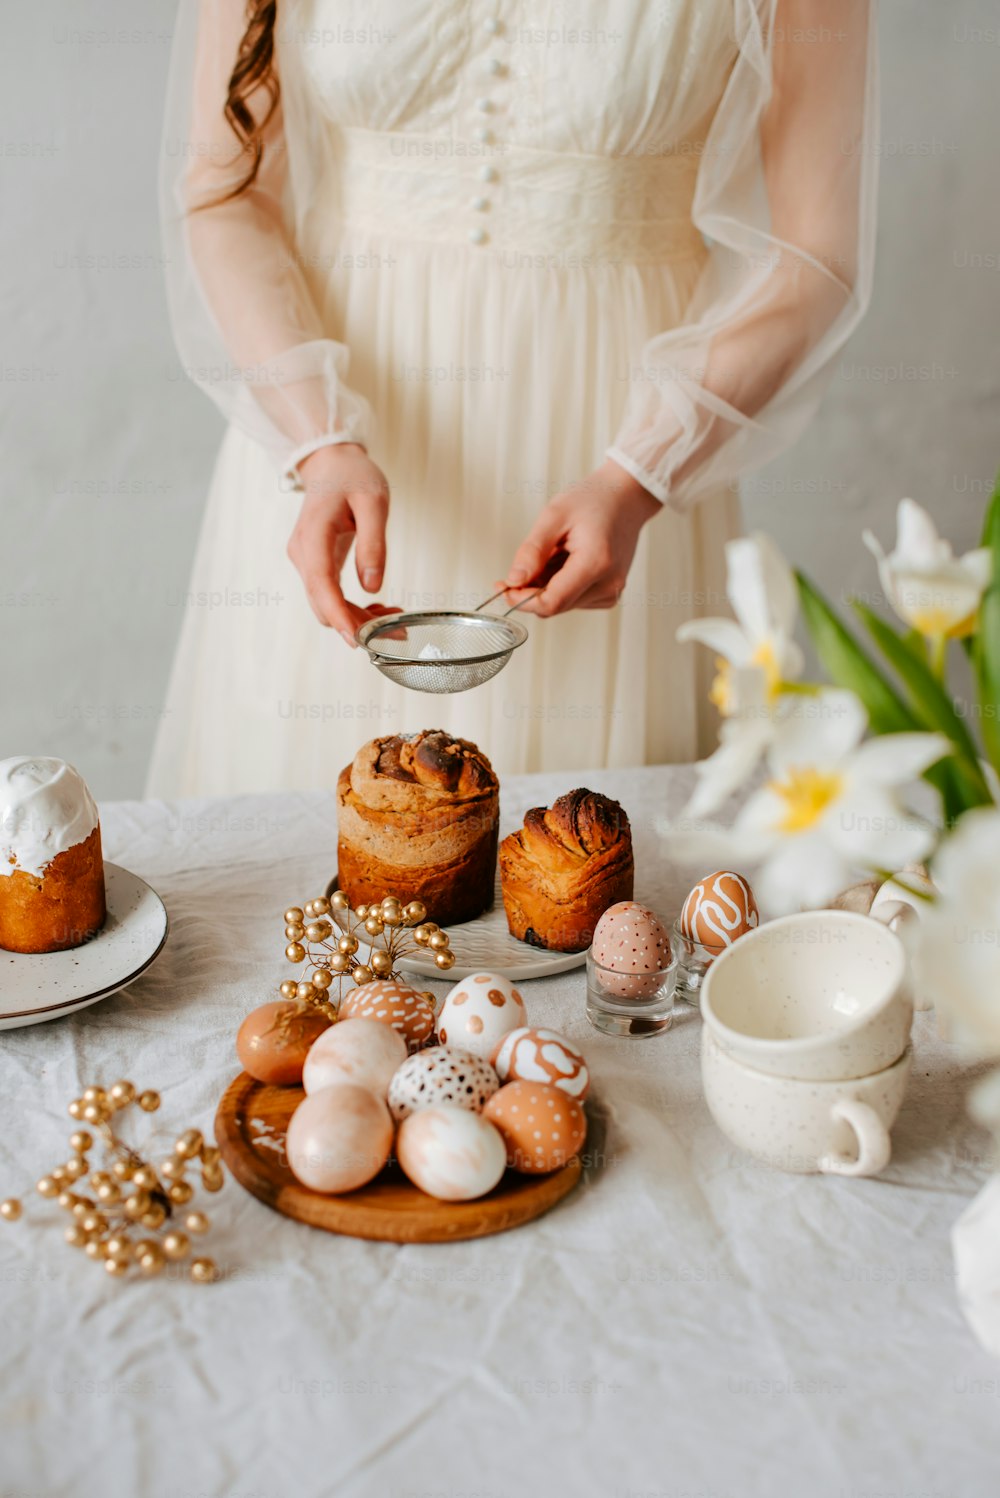 a woman in a white dress standing over a table filled with pastries